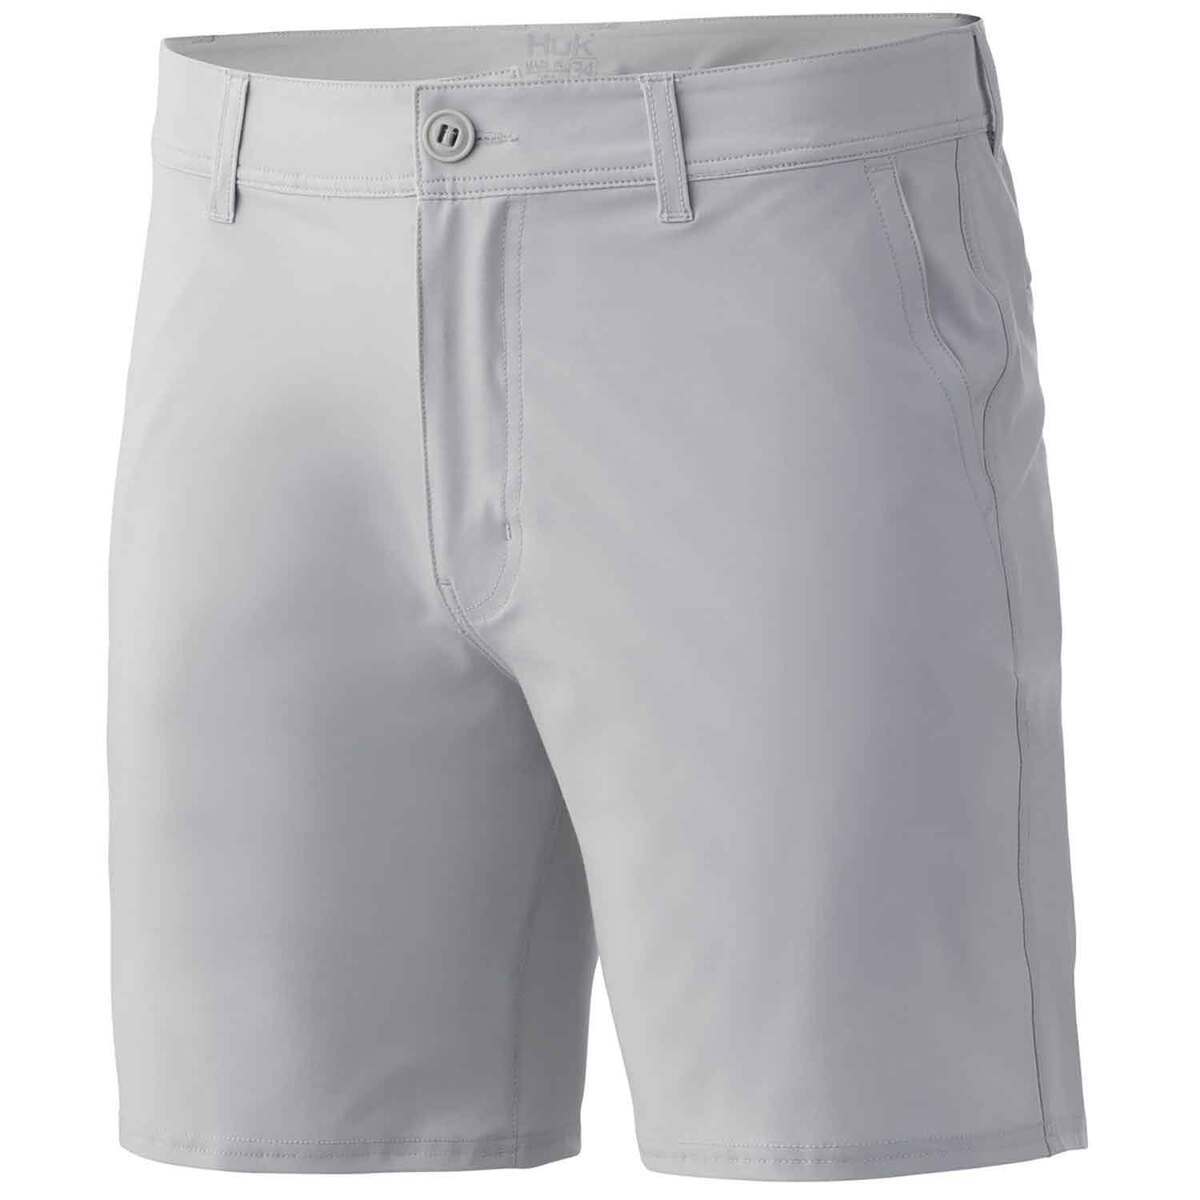 Huk Men's Waypoint Fishing Shorts - Oyster 38 by Sportsman's Warehouse